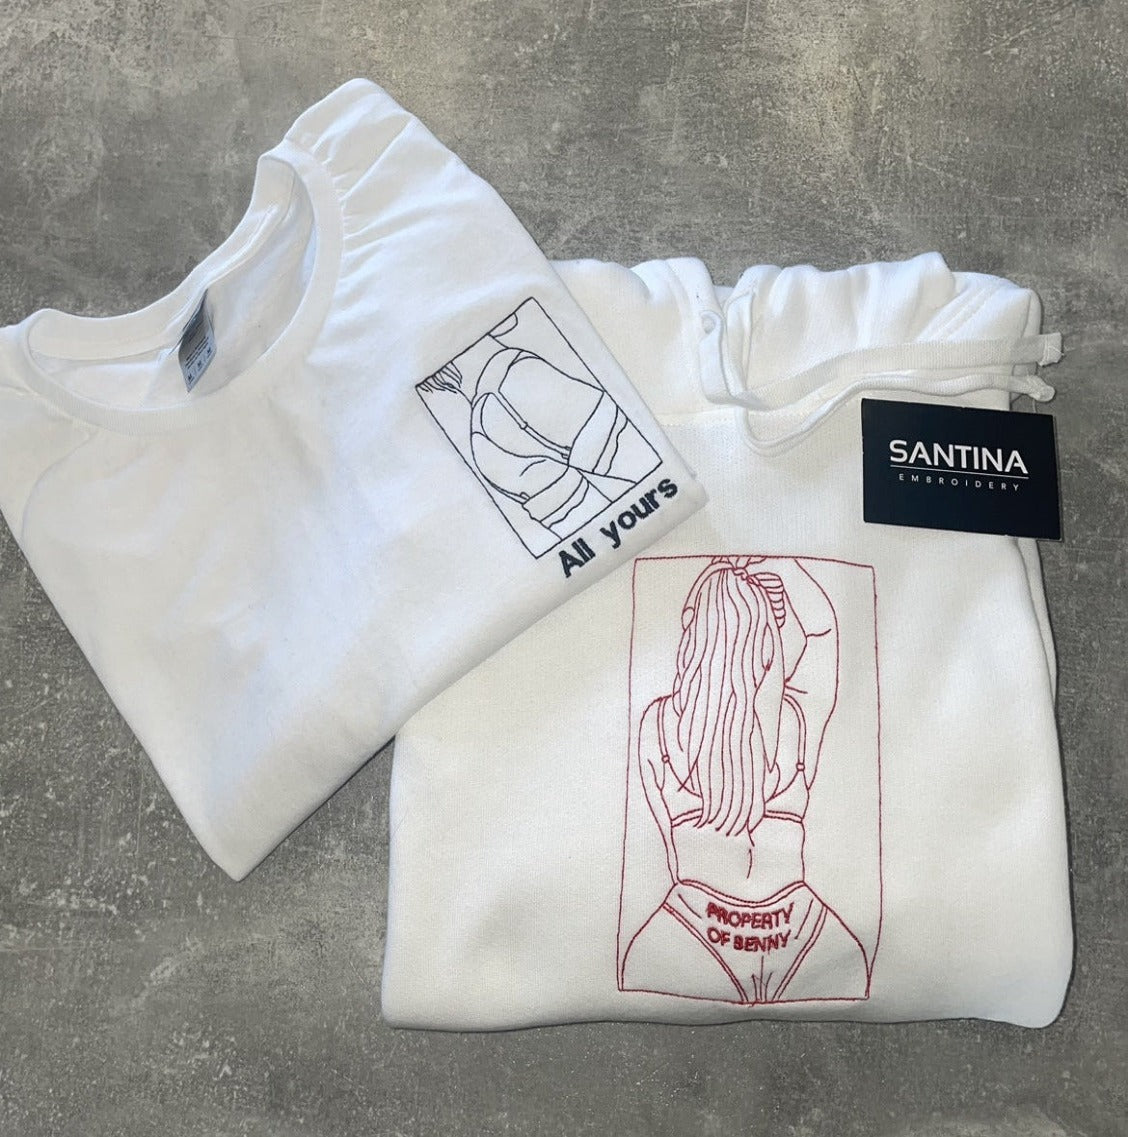 Spicy Embroidered T-Shirt, Sweatshirt, or Hoodie – Santina Embroidery